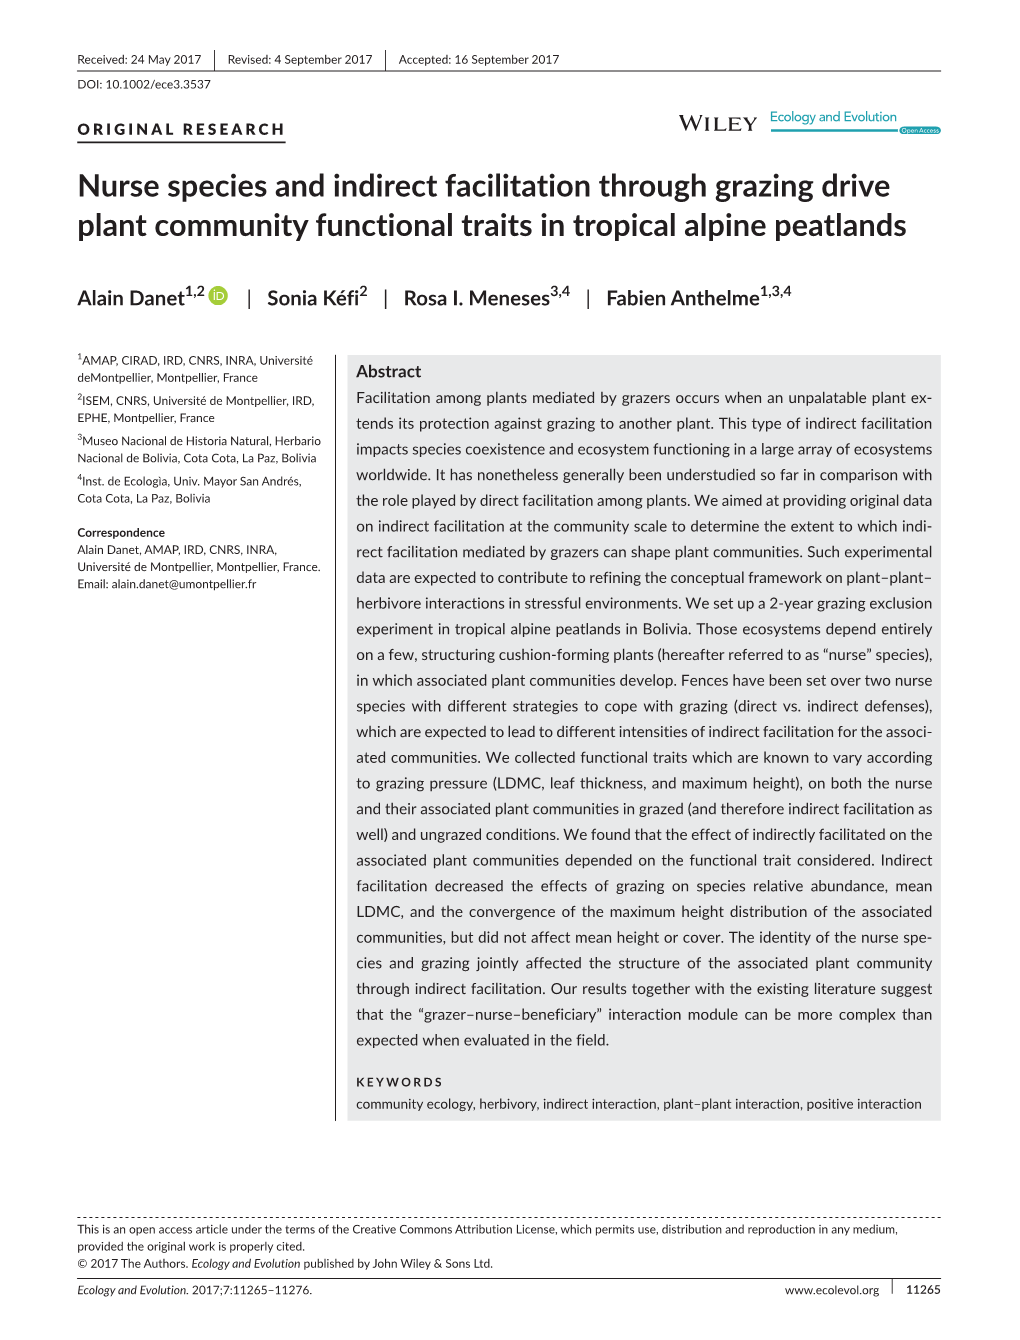 Nurse Species and Indirect Facilitation Through Grazing Drive Plant Community Functional Traits in Tropical Alpine Peatlands